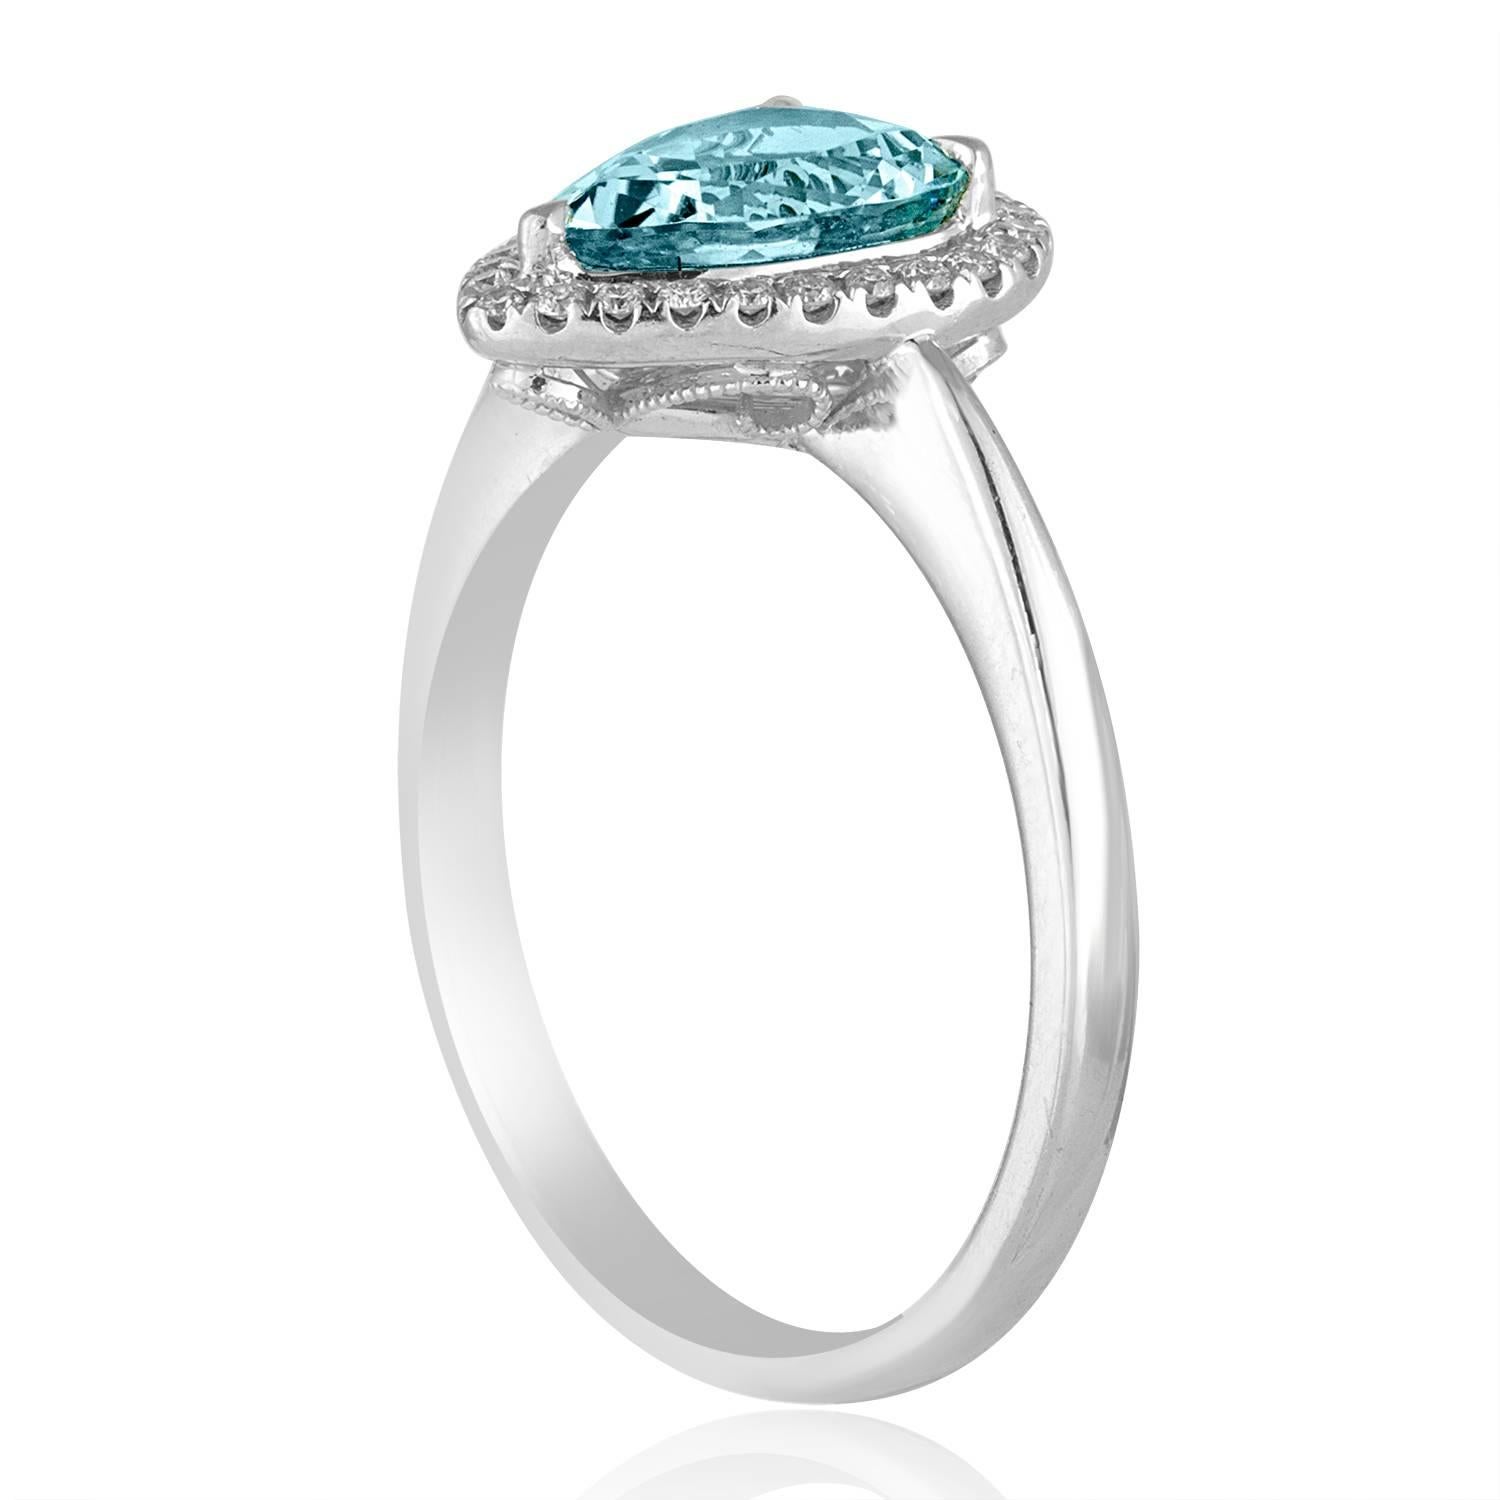 Stunning Blue Topaz Ring
The ring is 18K White Gold
There are 0.15 Carats In Diamonds G/H VS/SI
The Blue Topaz is a Pear Shaped 1.20 Carats
The top measures 6/16